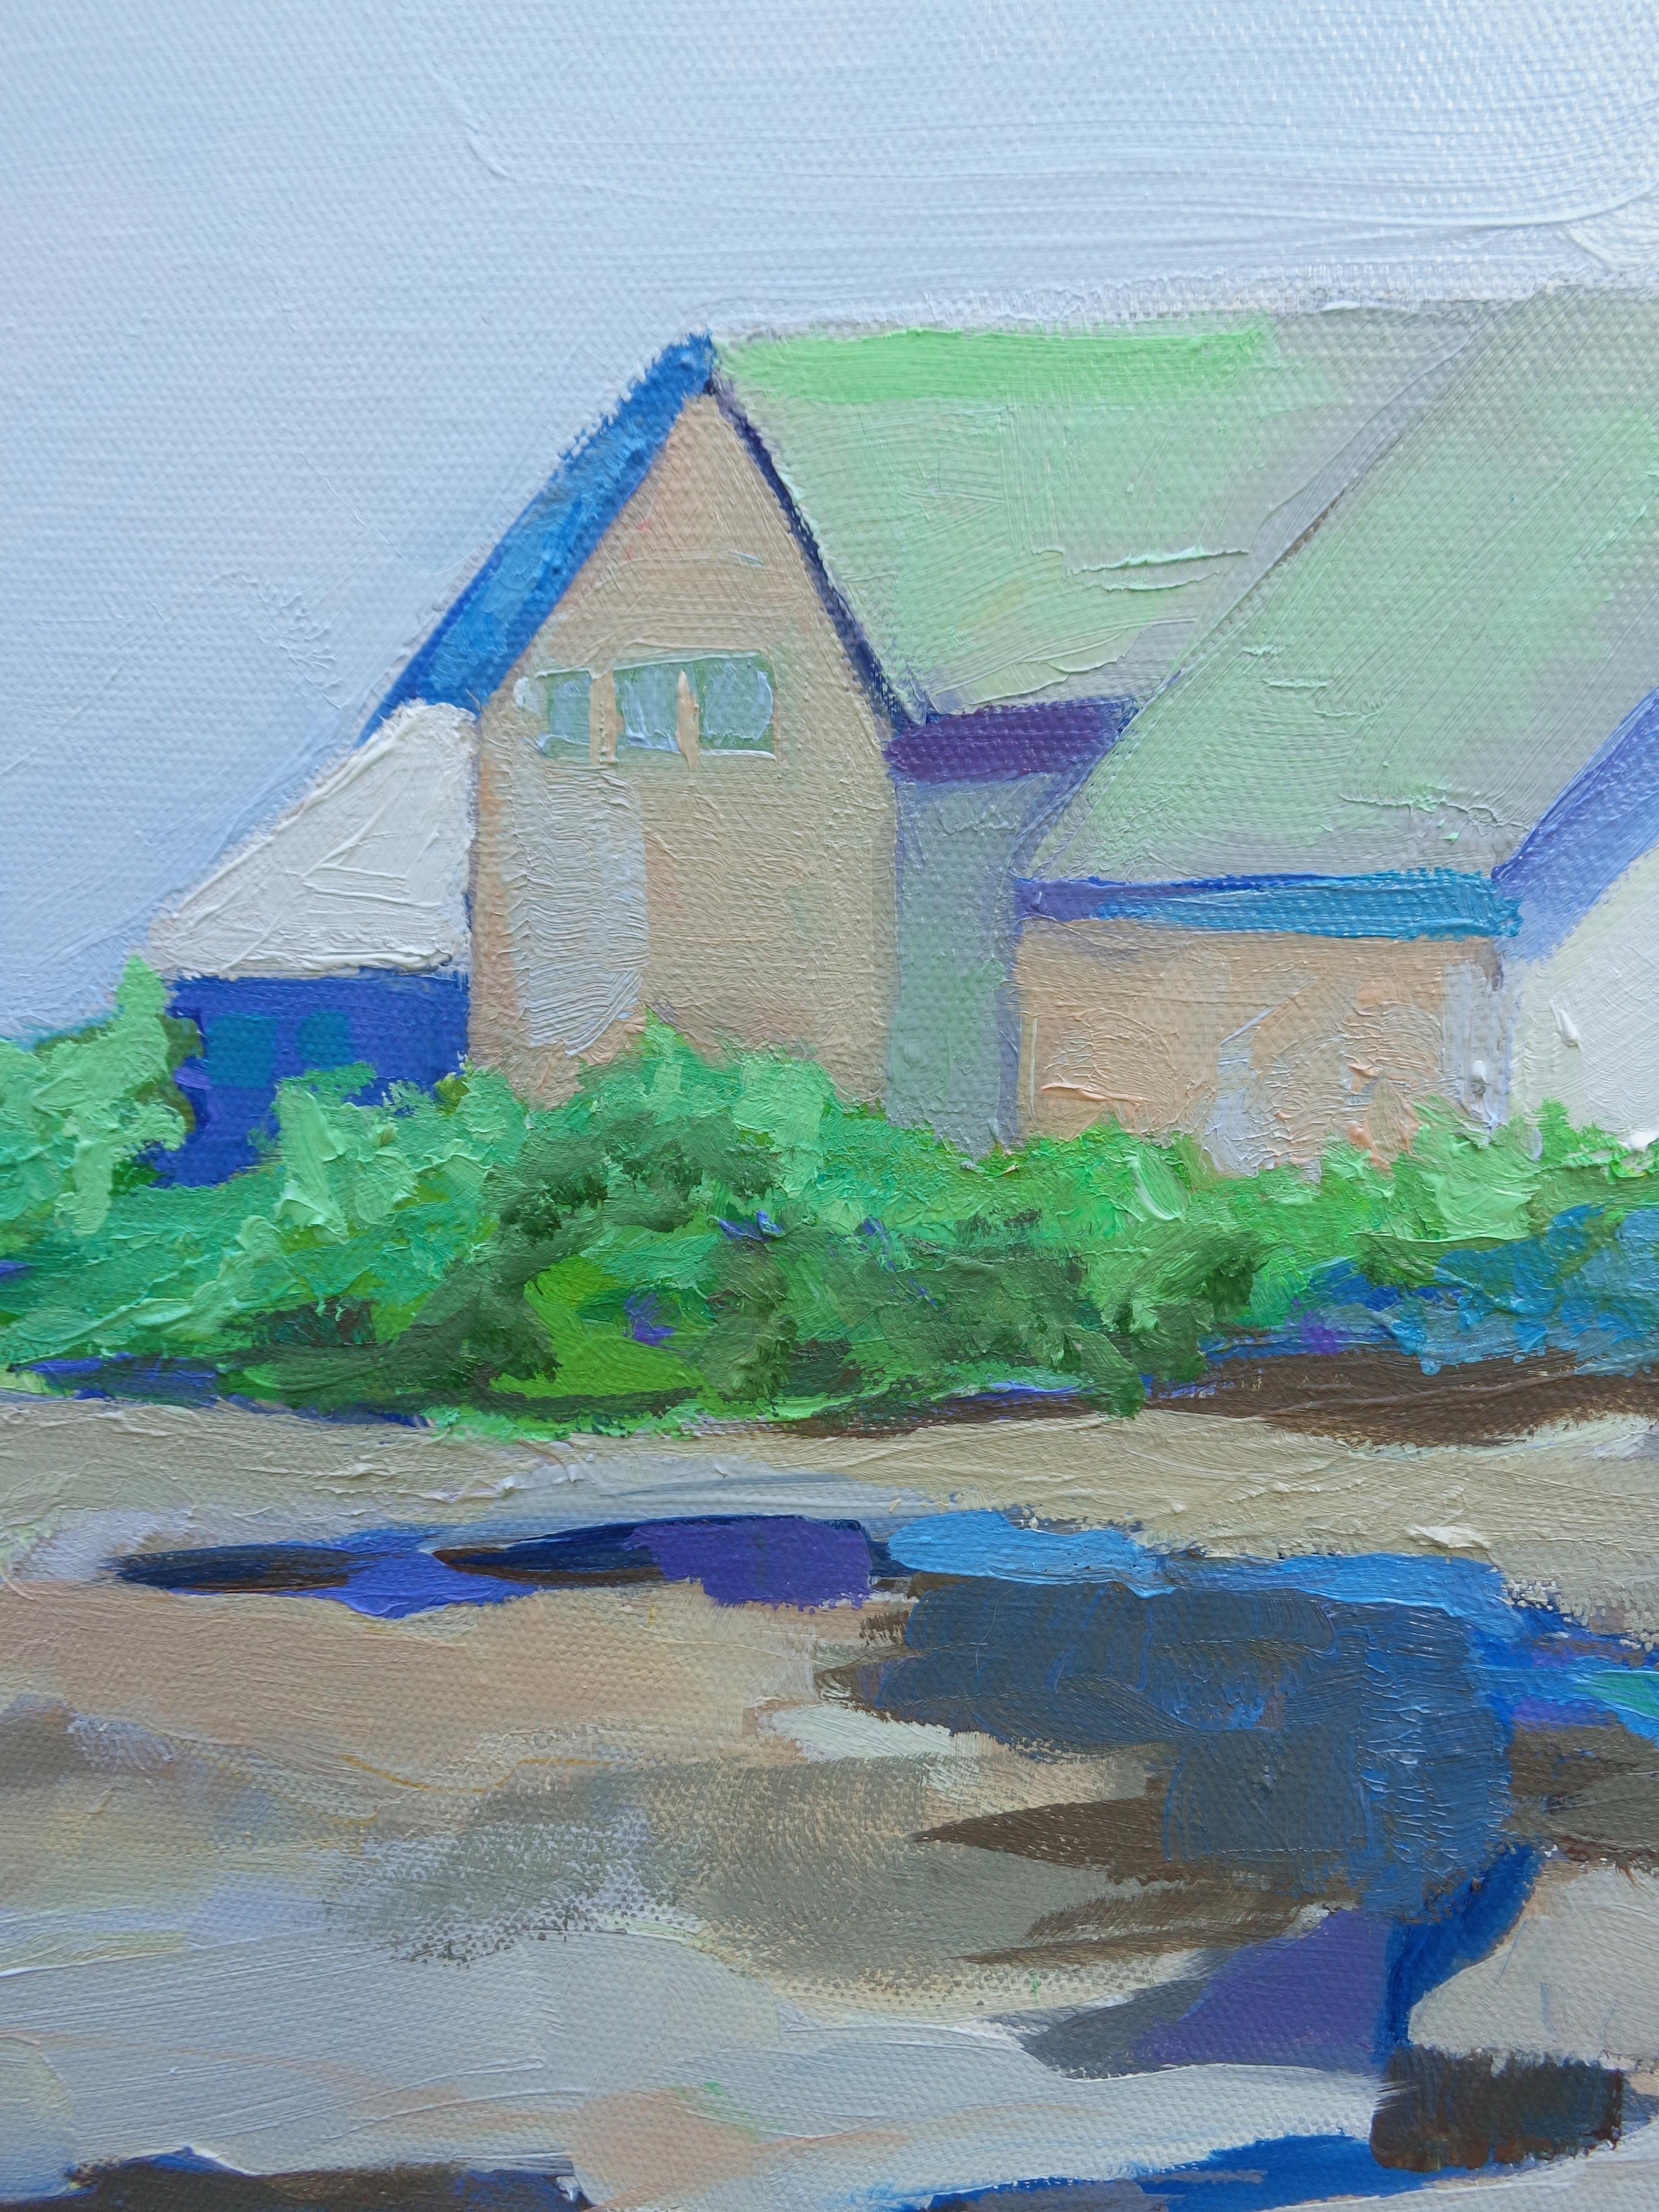 Coming Home is a view along the Marginal Way in Ogunquit, Maine.As I climbed up the rocks, I was struck by the simplicity of these homes at this angle.While painting, I remained interested in the clean plain lines, ,shapes and composition. ::